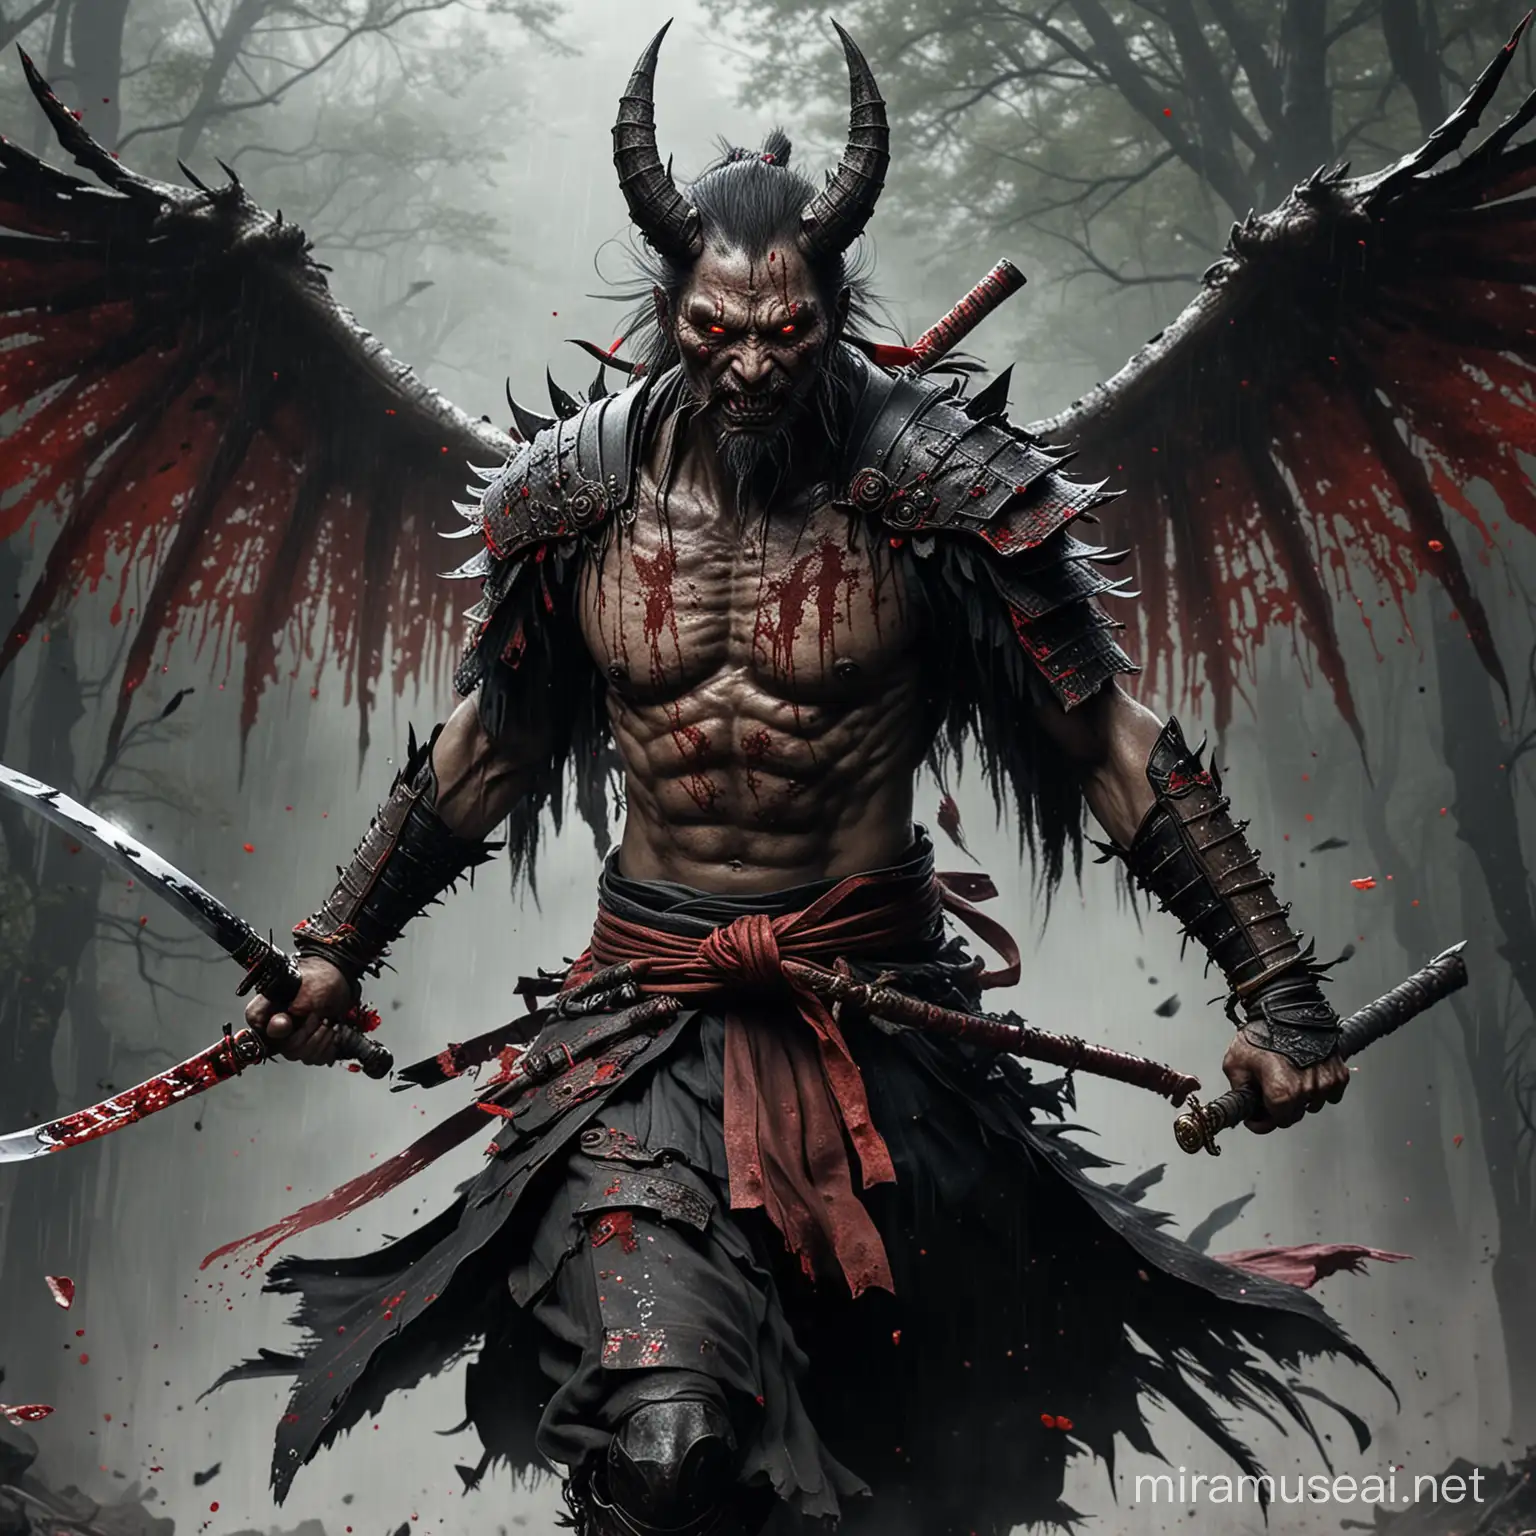 creepy samurai demon with blood all over his arms and wings running with swornd in his hand